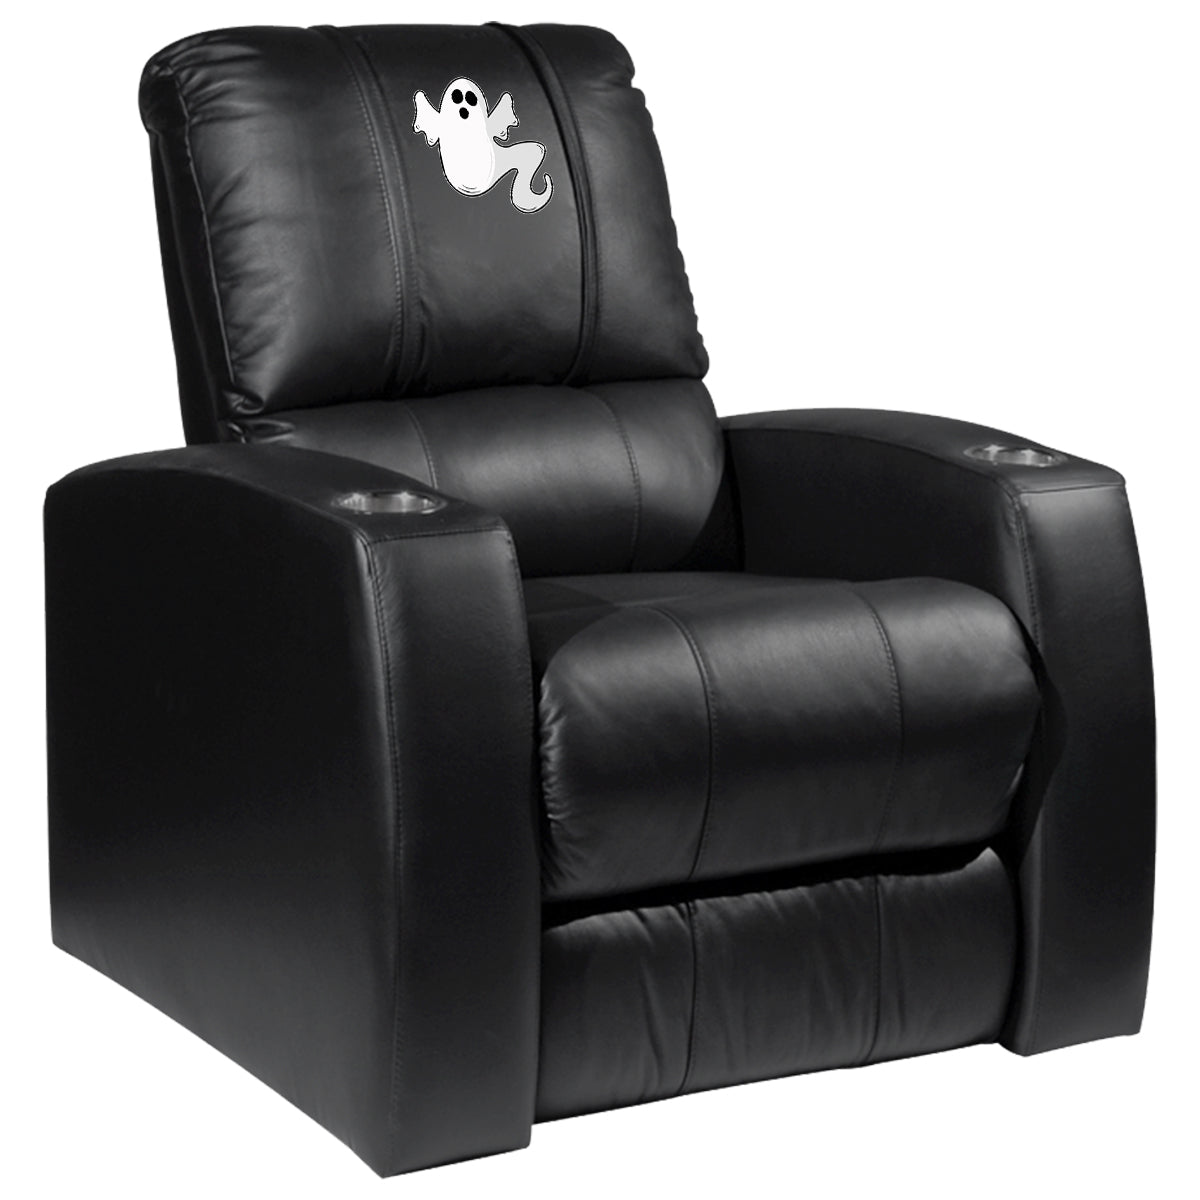 Relax Recliner with Zippy The Ghost Logo